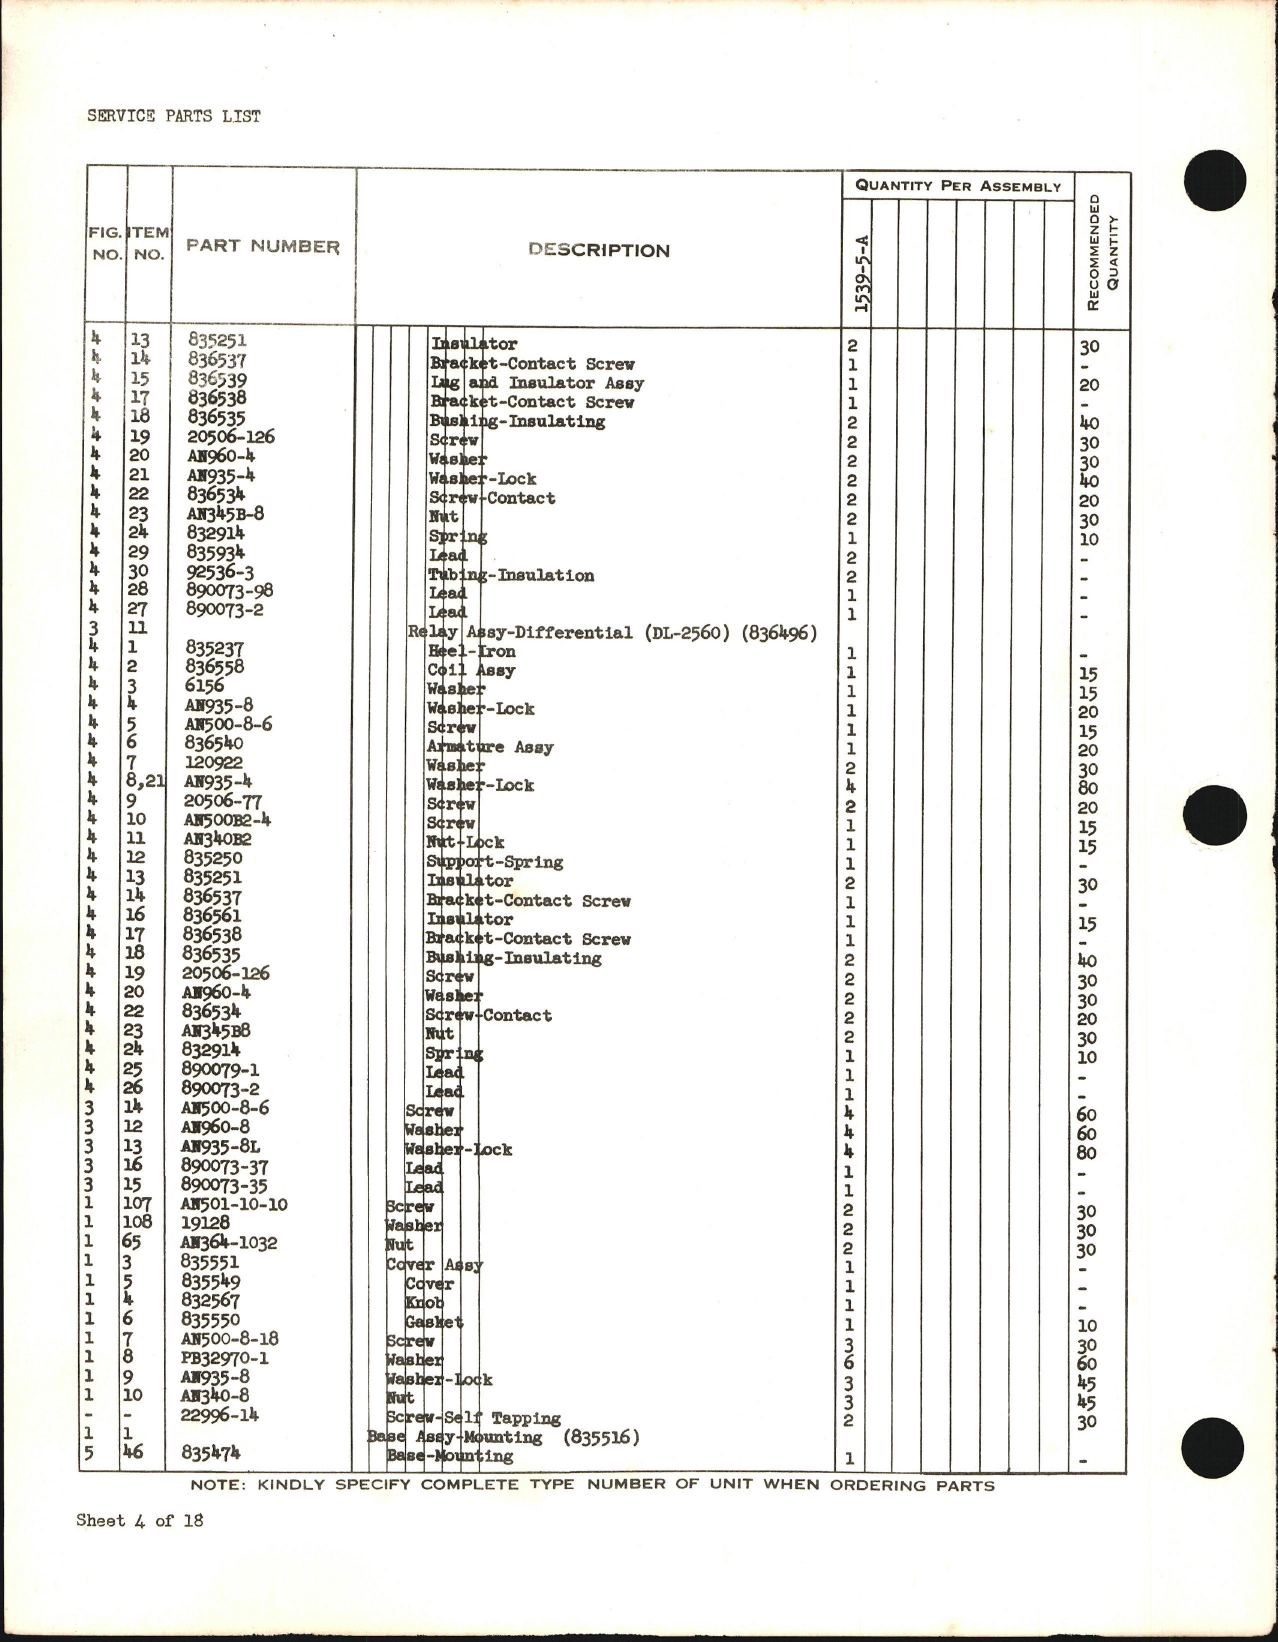 Sample page 6 from AirCorps Library document: Service Parts List for Generator Control Panel Type 1539-5, -7, -8, and -9